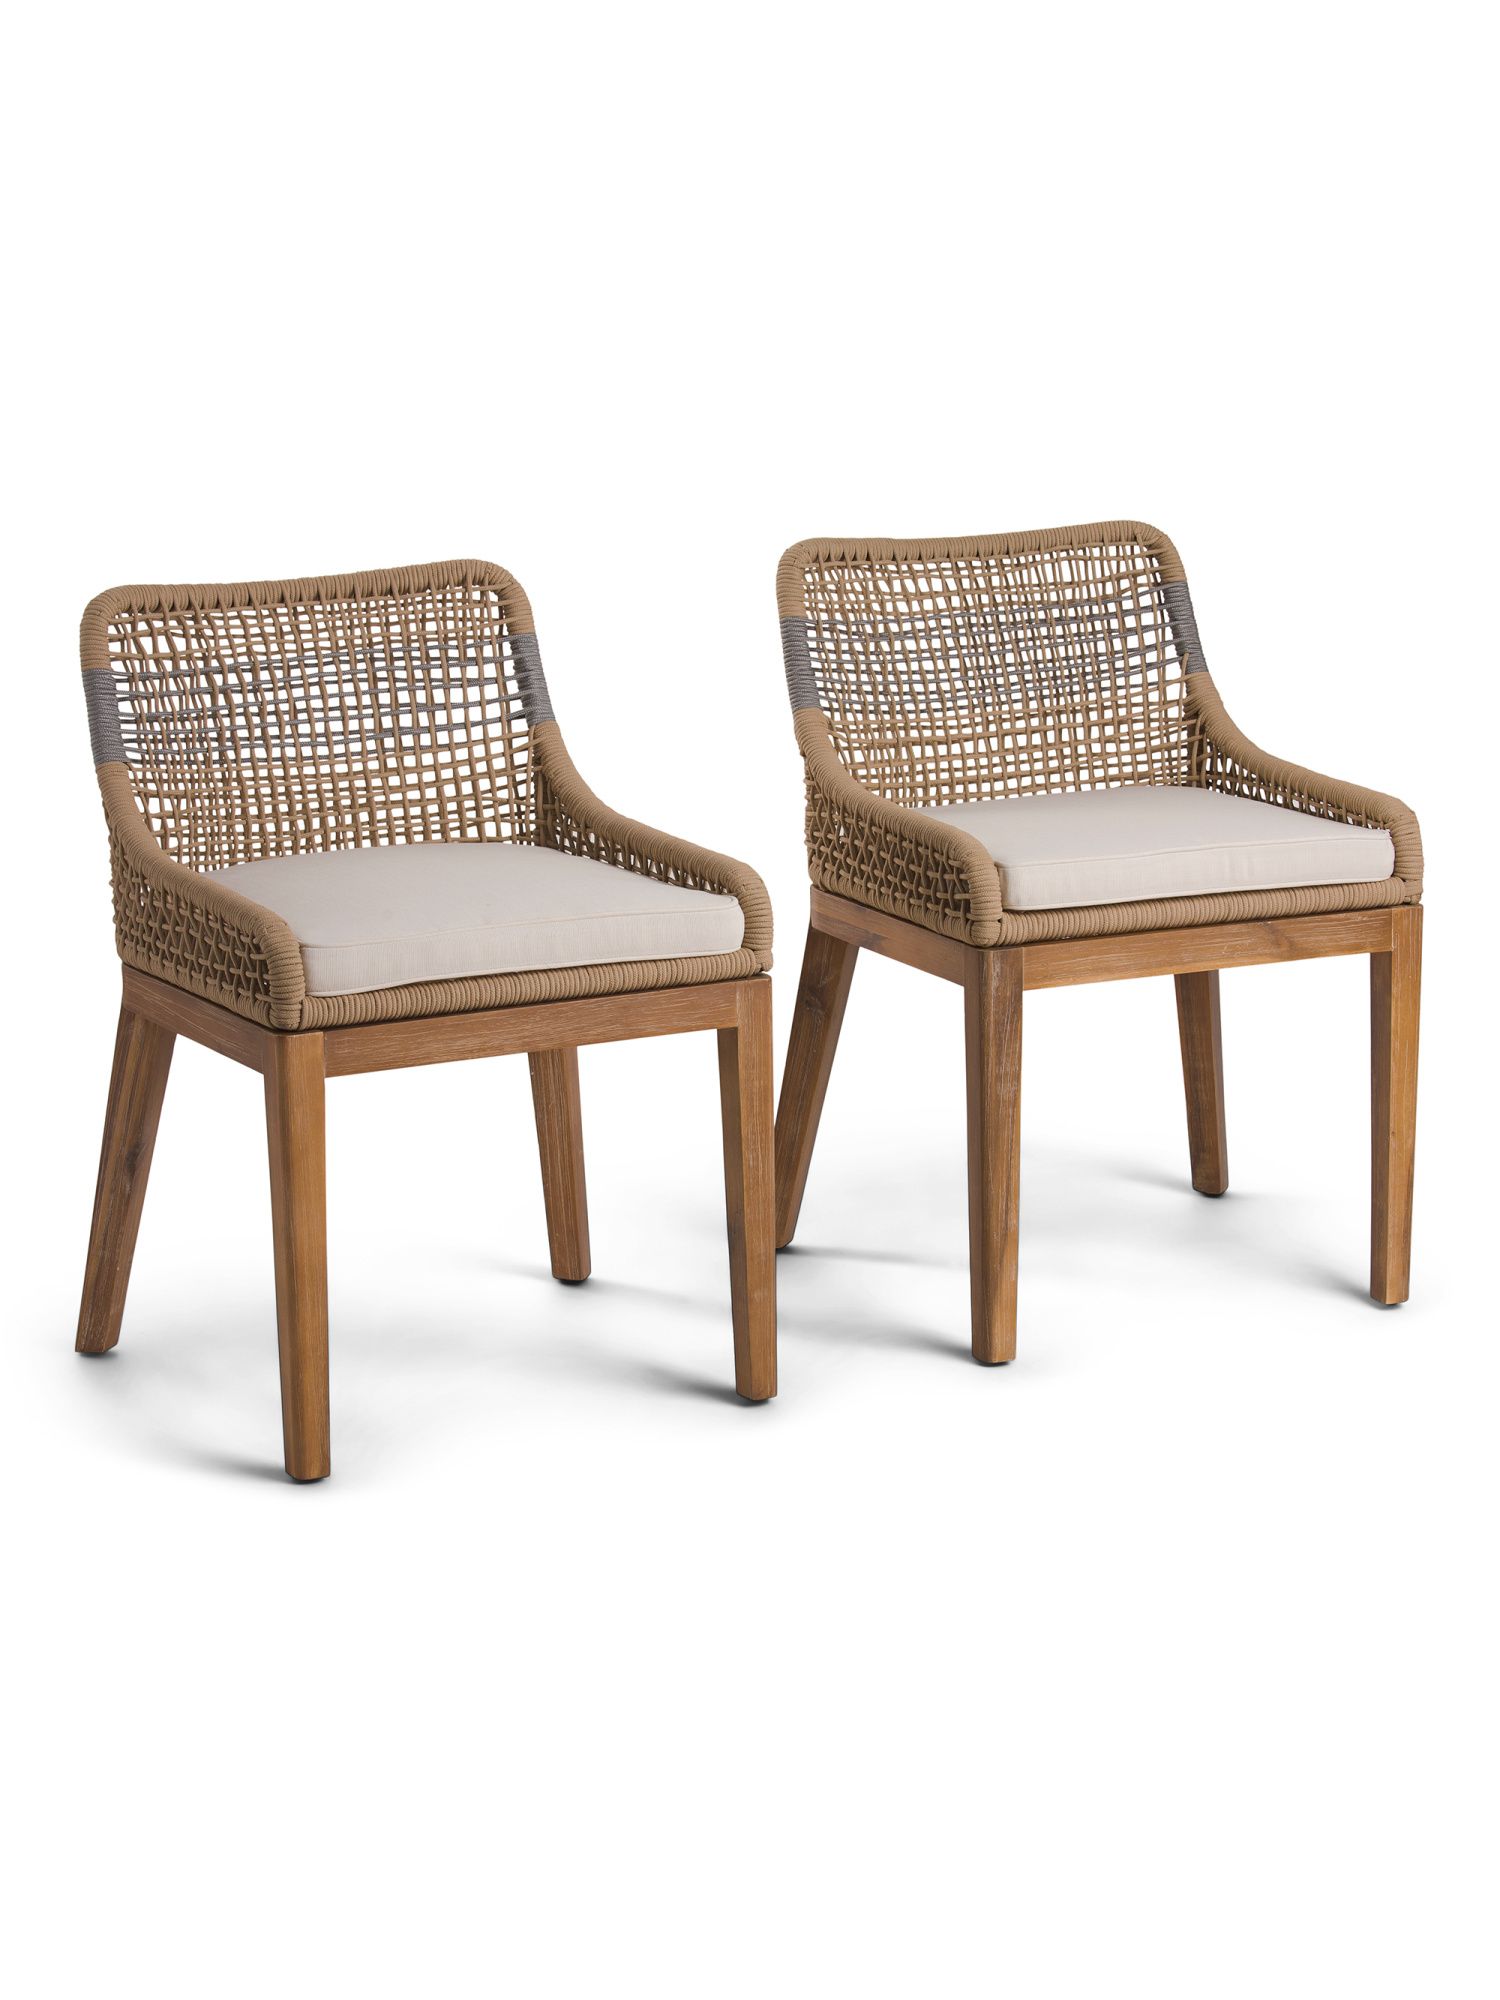 Set Of 2 Woven Striped Dining Chairs | Kitchen & Dining Room | Marshalls | Marshalls